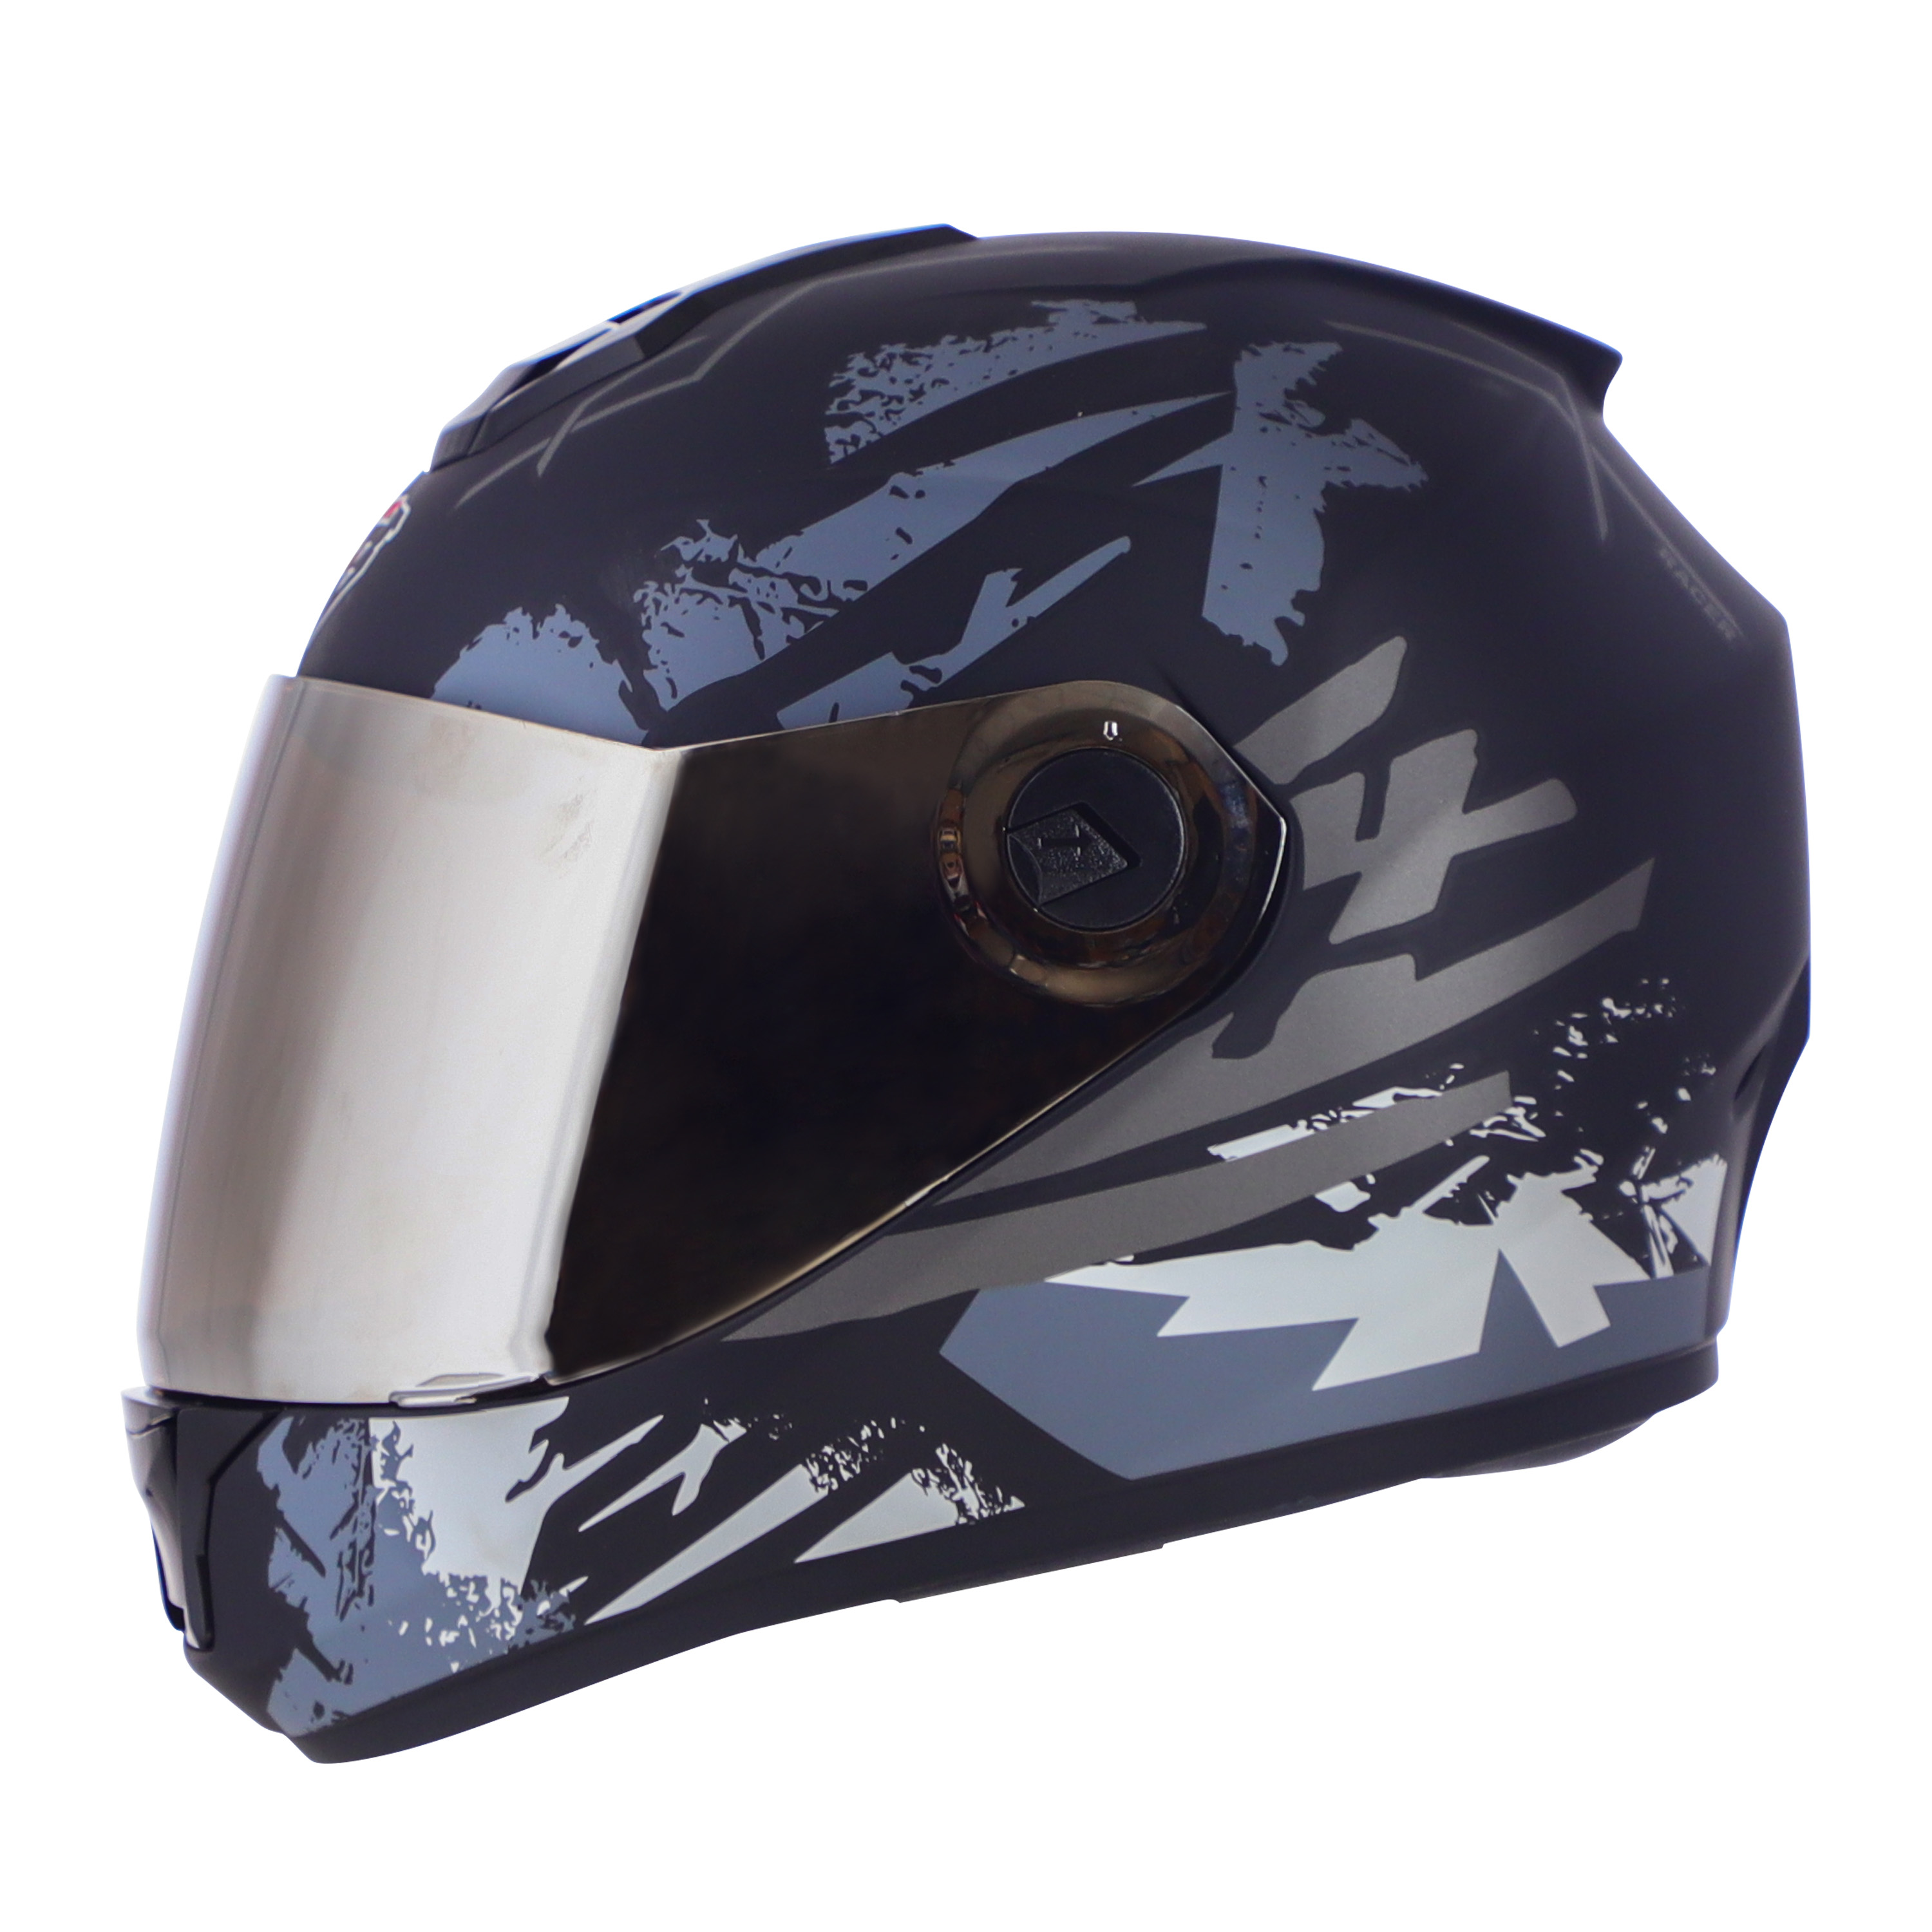 Steelbird SBH-11 Zoom Racer ISI Certified Full Face Graphic Helmet For Men And Women (Glossy Black Grey With Chrome Silver Visor)